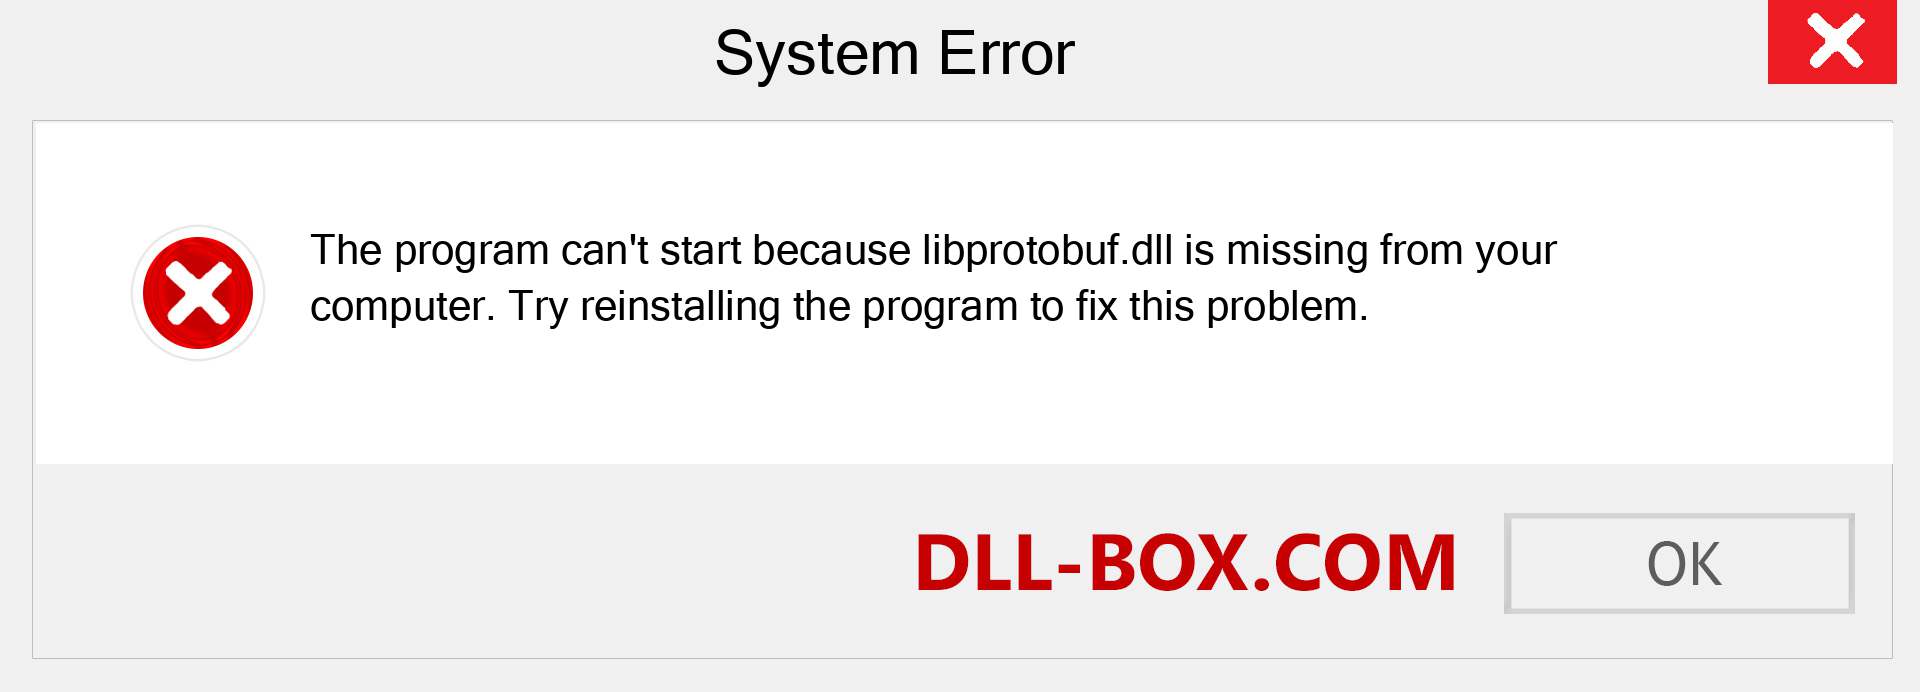  libprotobuf.dll file is missing?. Download for Windows 7, 8, 10 - Fix  libprotobuf dll Missing Error on Windows, photos, images